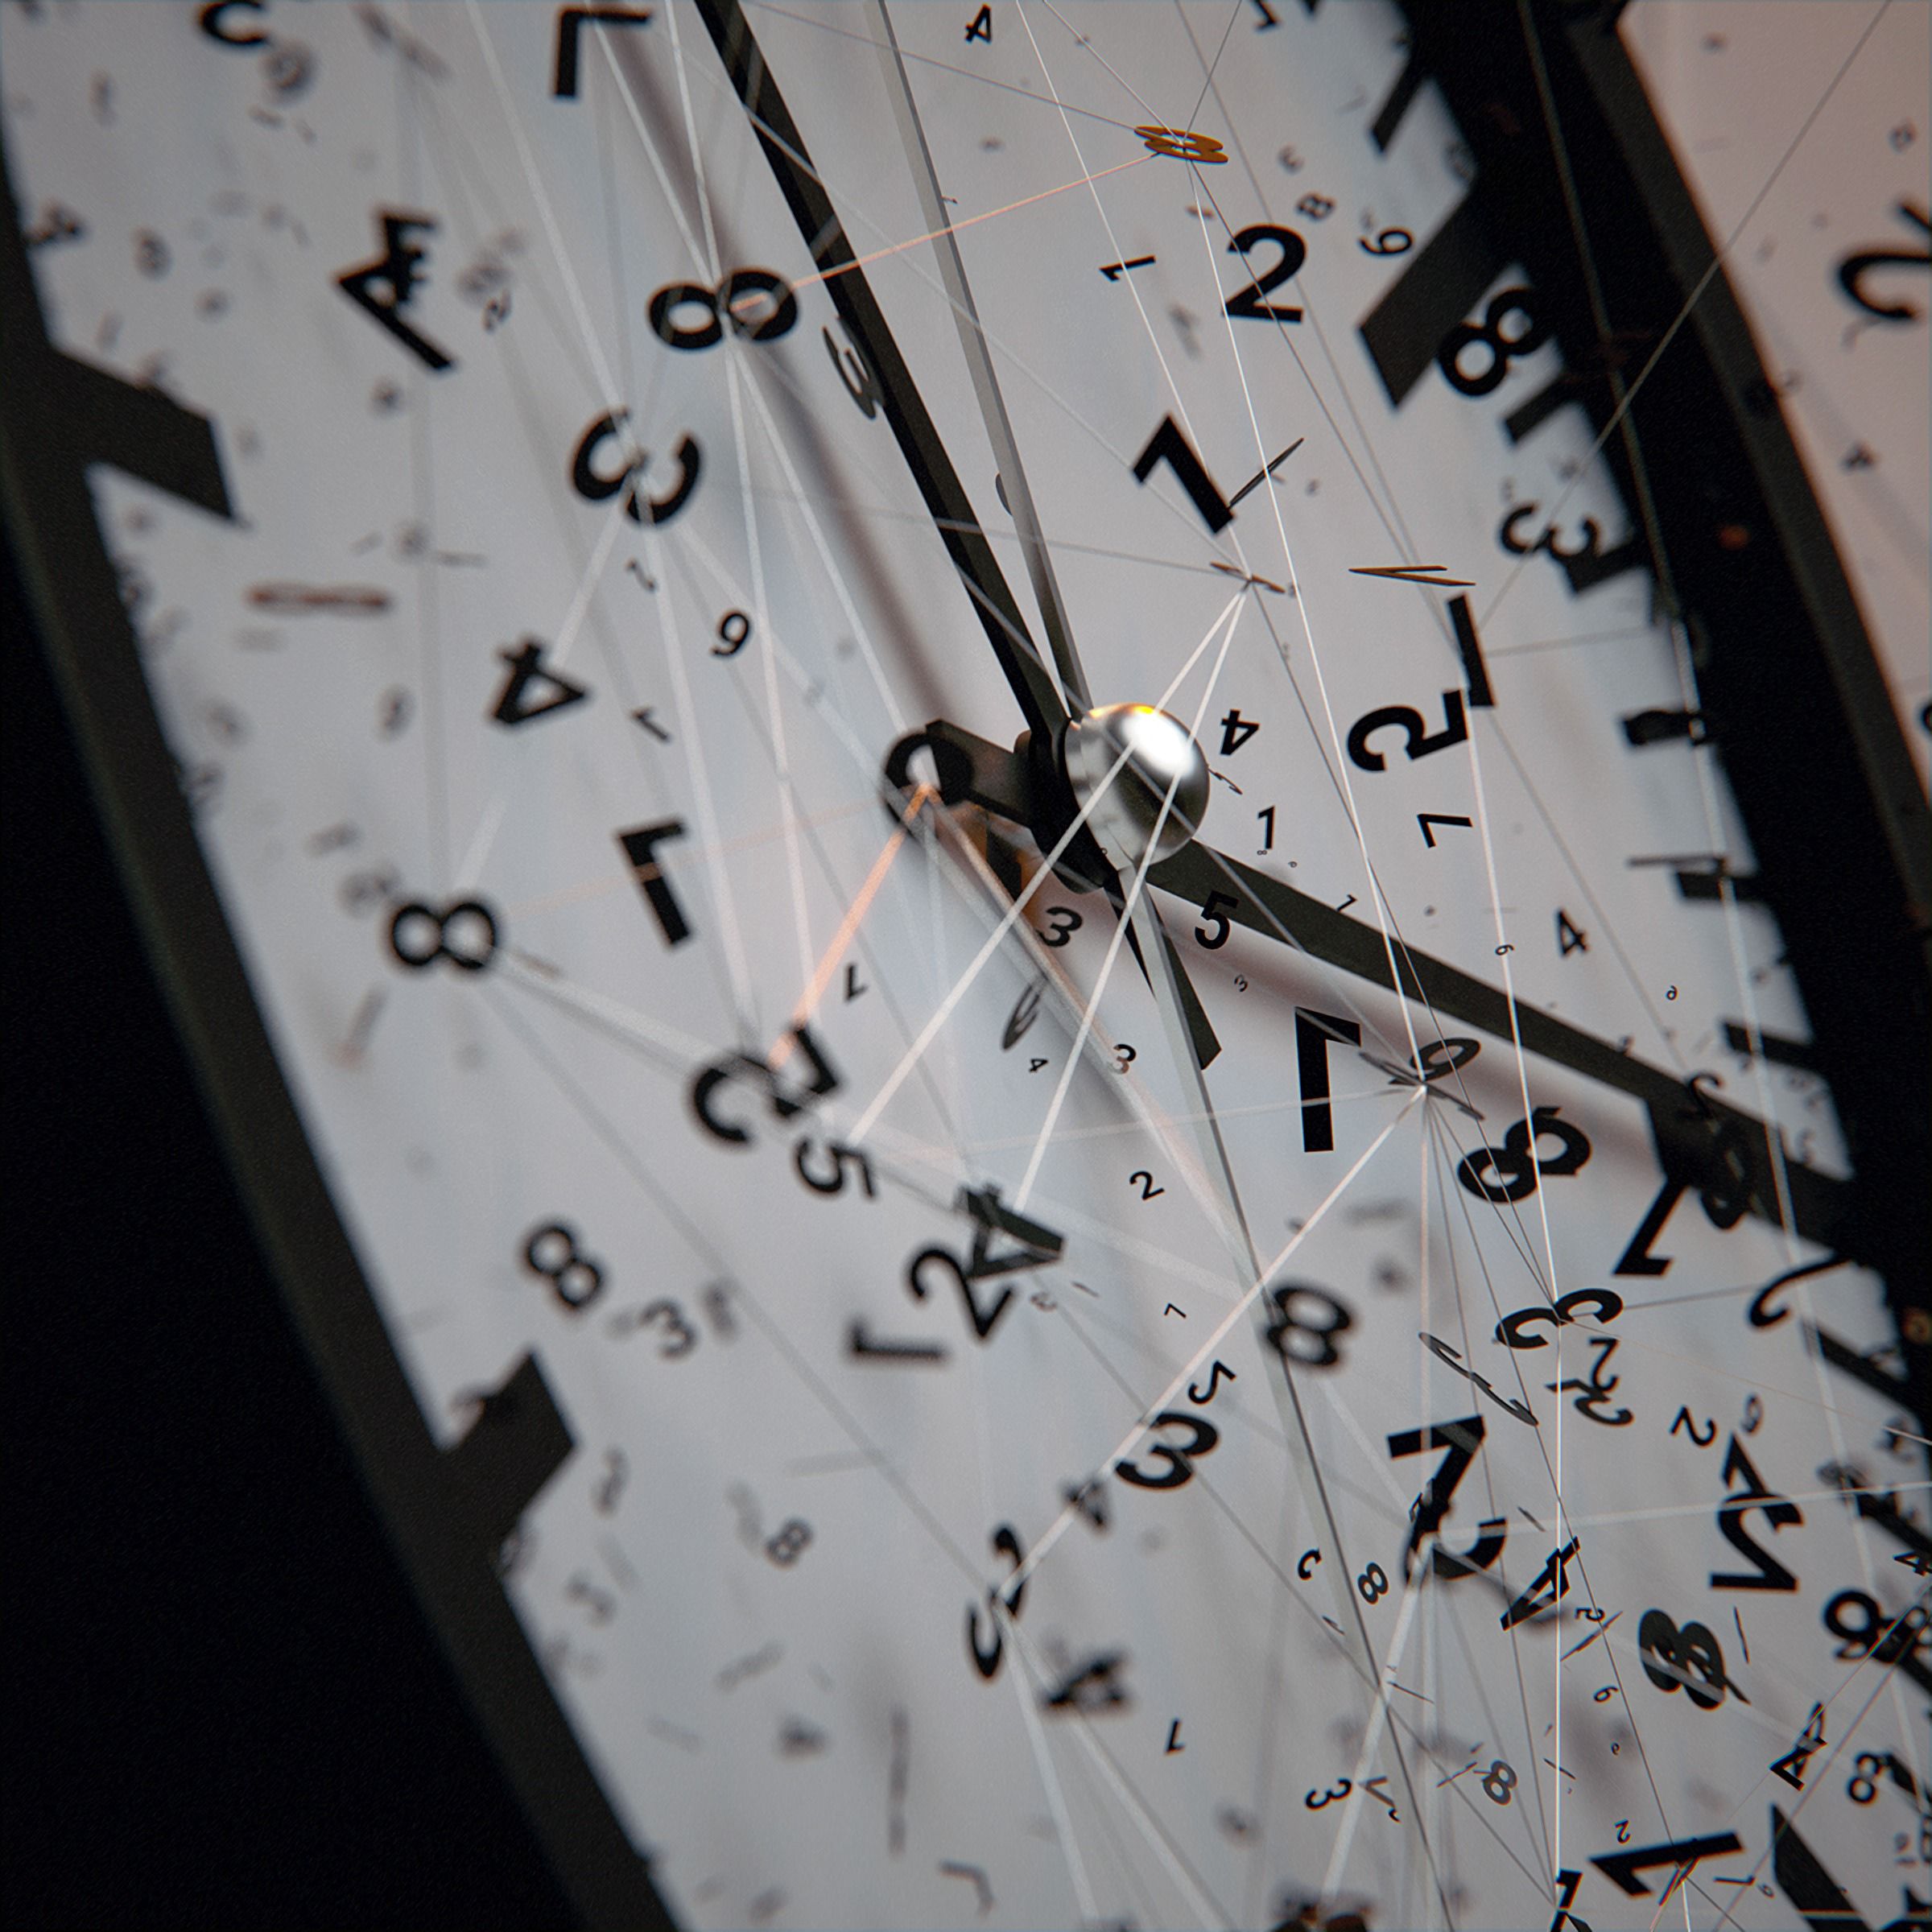 miscellanea, clock, numbers, dial, intricate, miscellaneous, clock face, lines, confused, arrows HD wallpaper